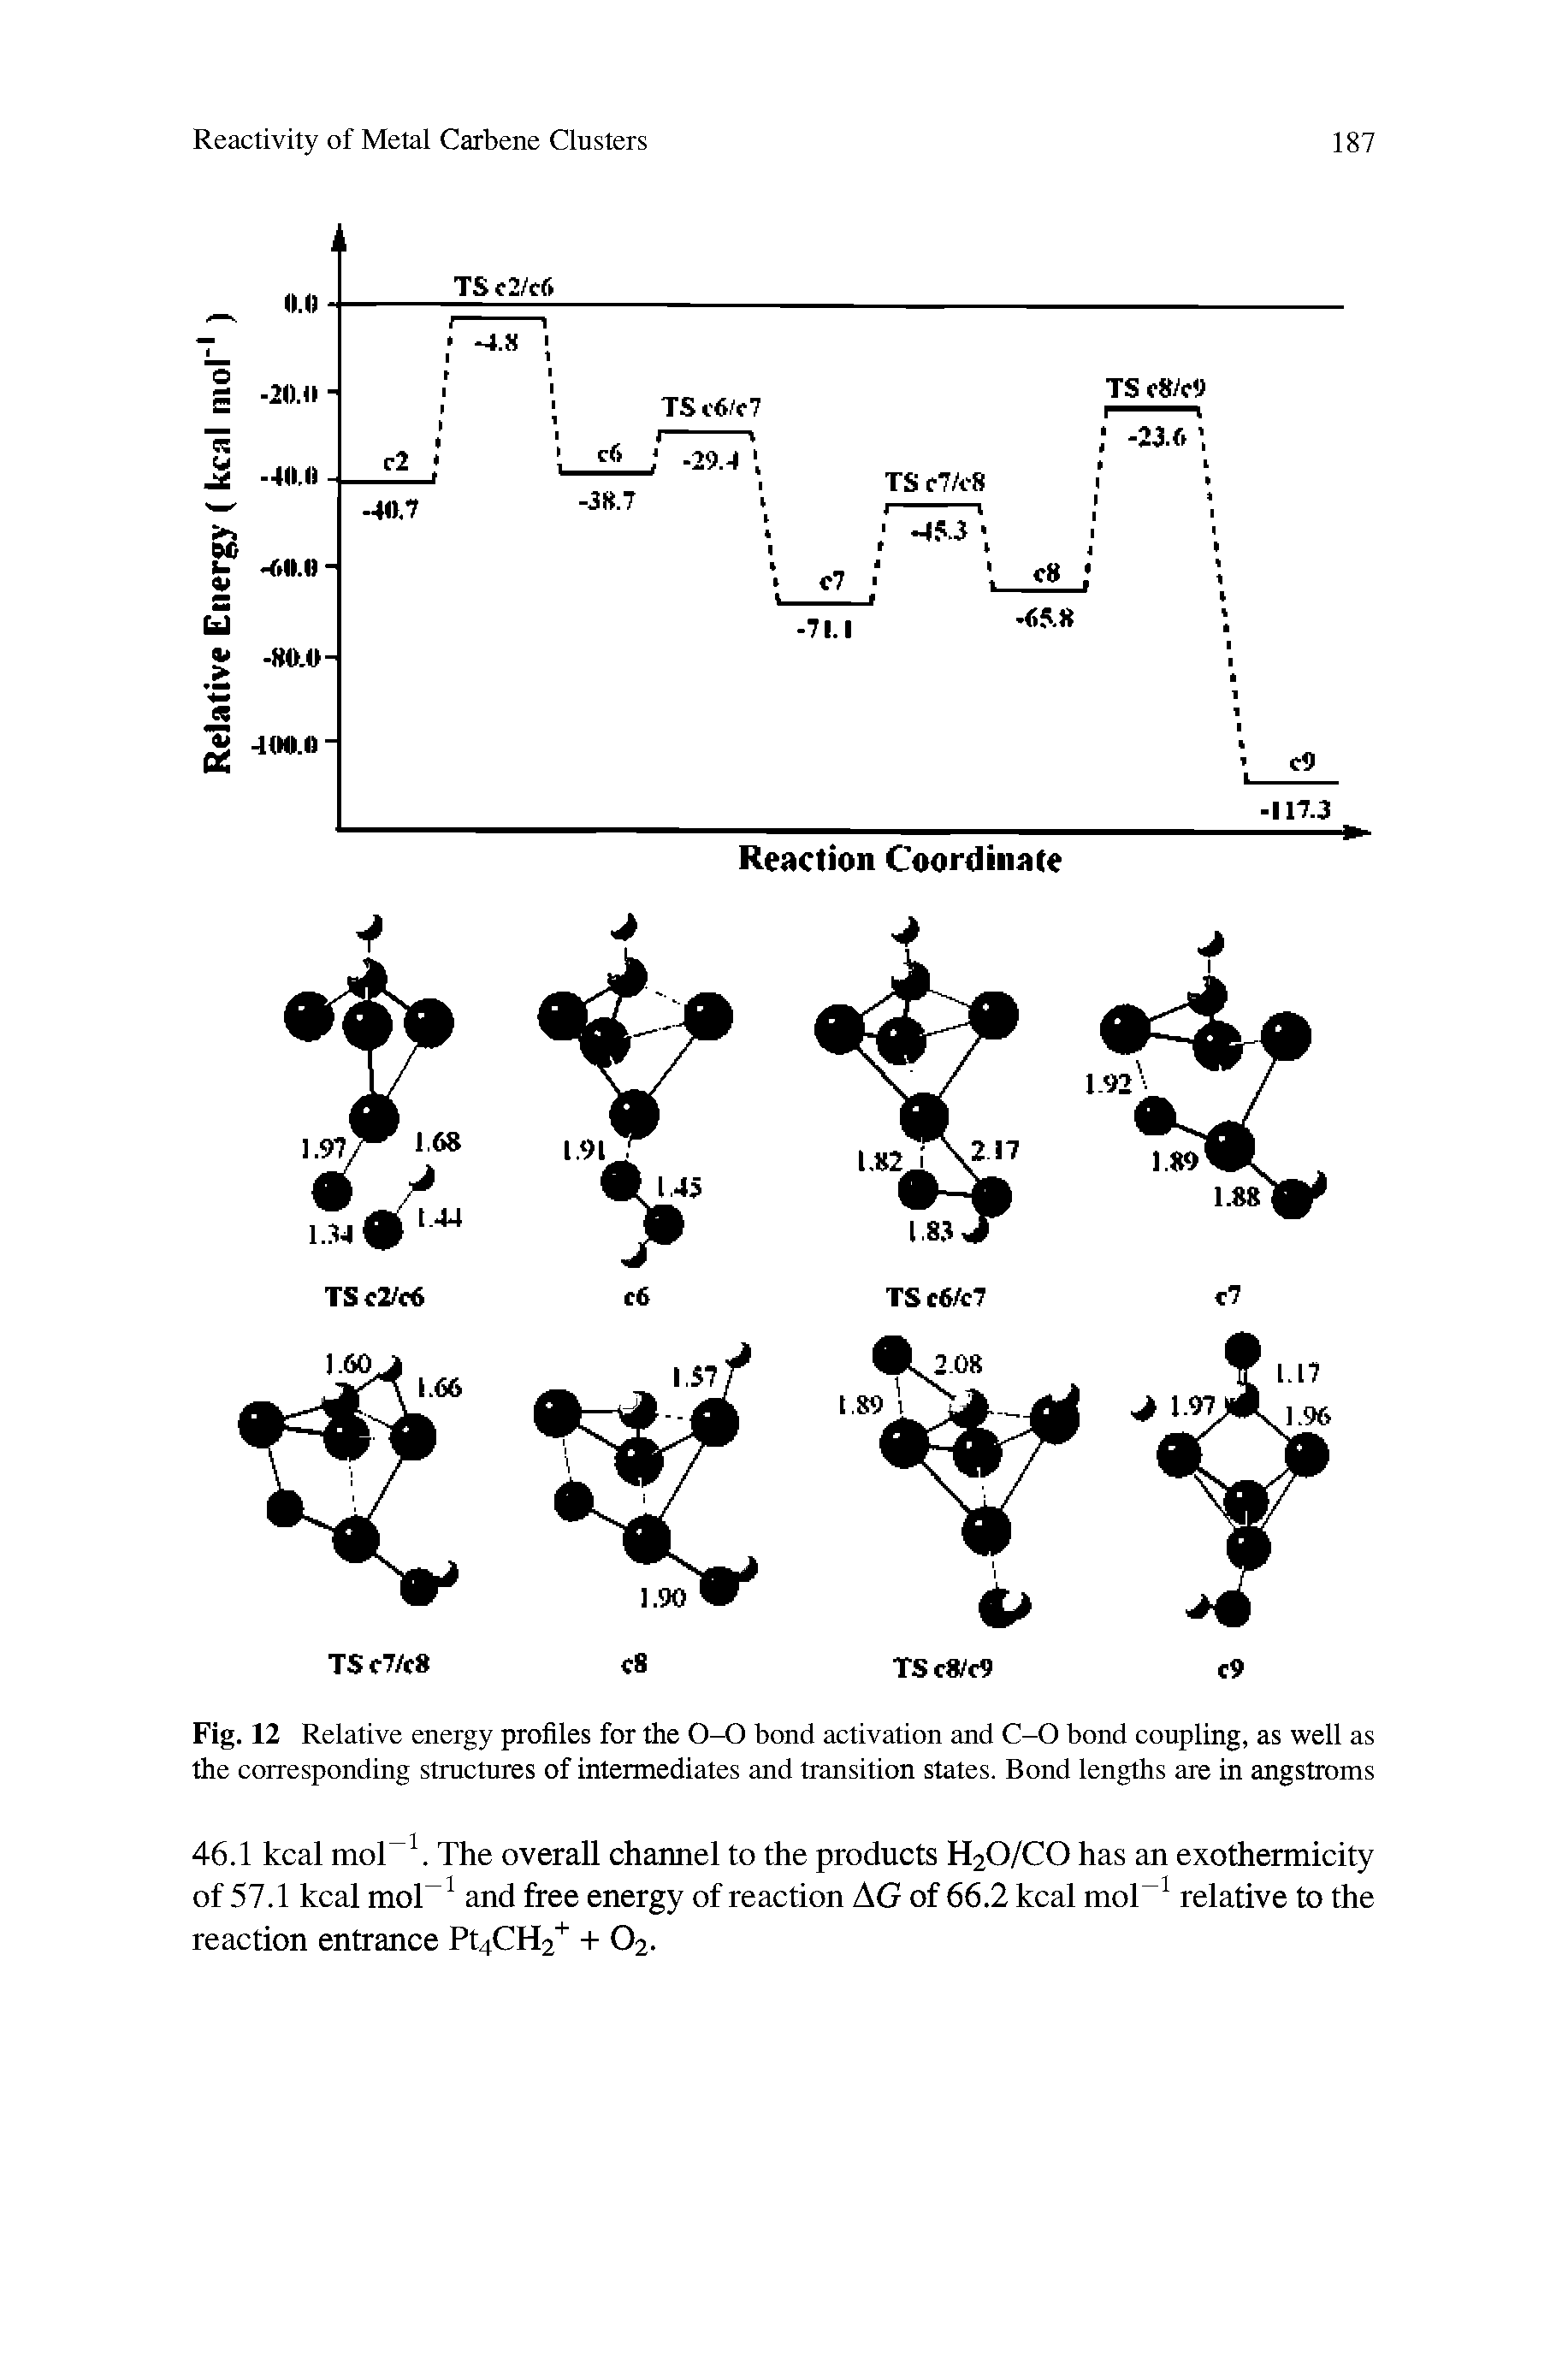 Fig. 12 Relative energy profiles for the 0-0 bond activation and C-O bond coupling, as well as the corresponding structures of intermediates and transition states. Bond lengths are in angstroms...